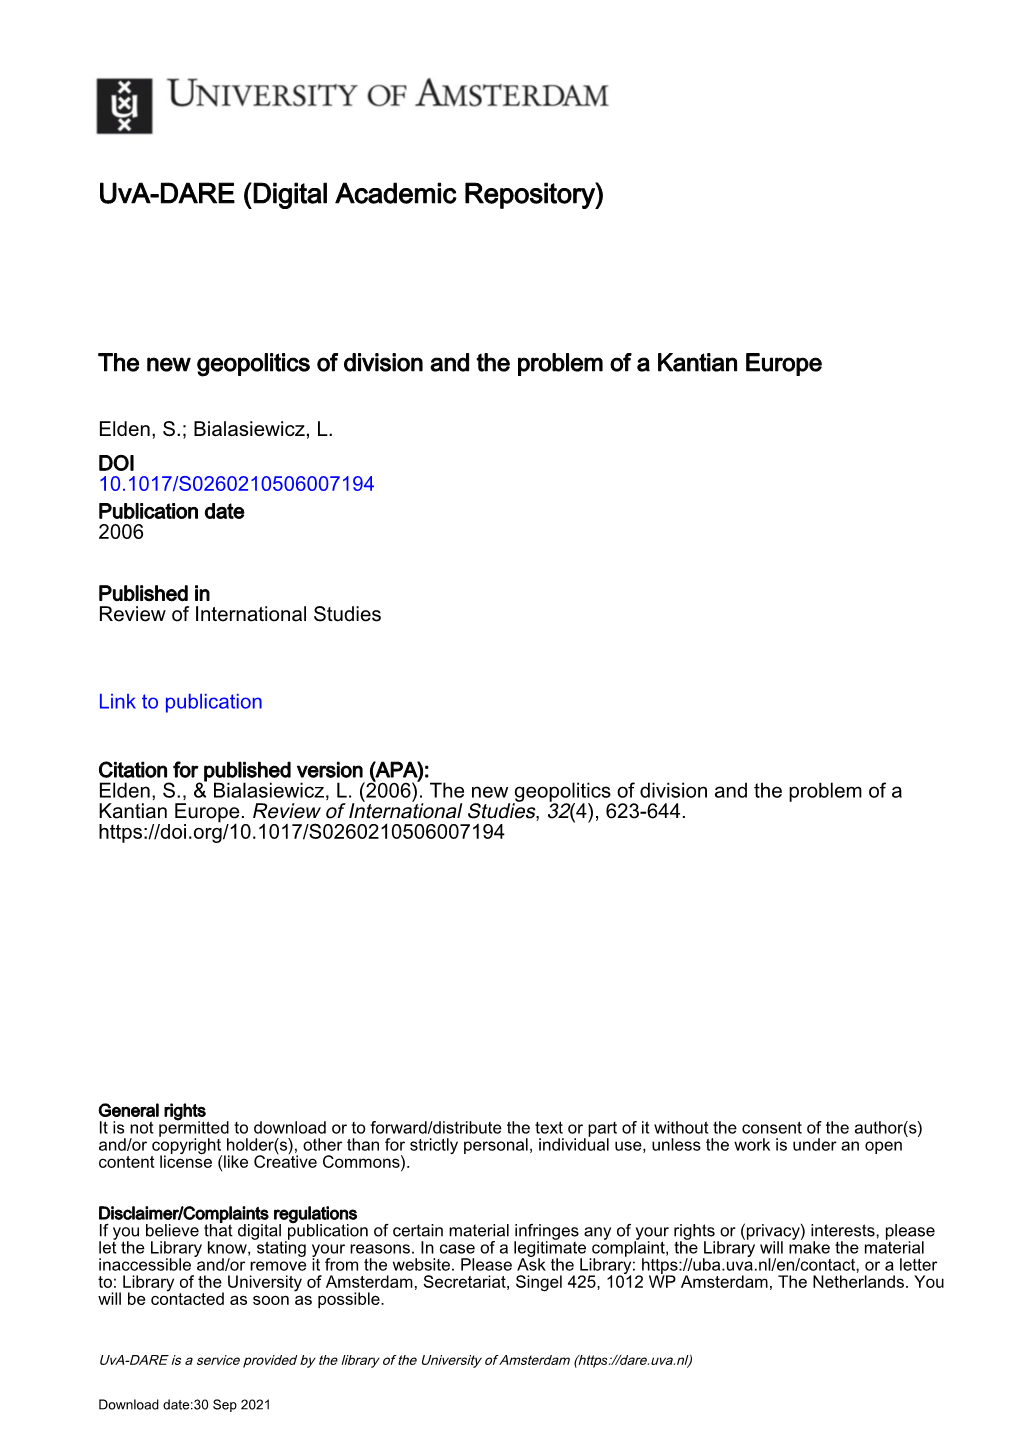 The New Geopolitics of Division and the Problem of a Kantian Europe